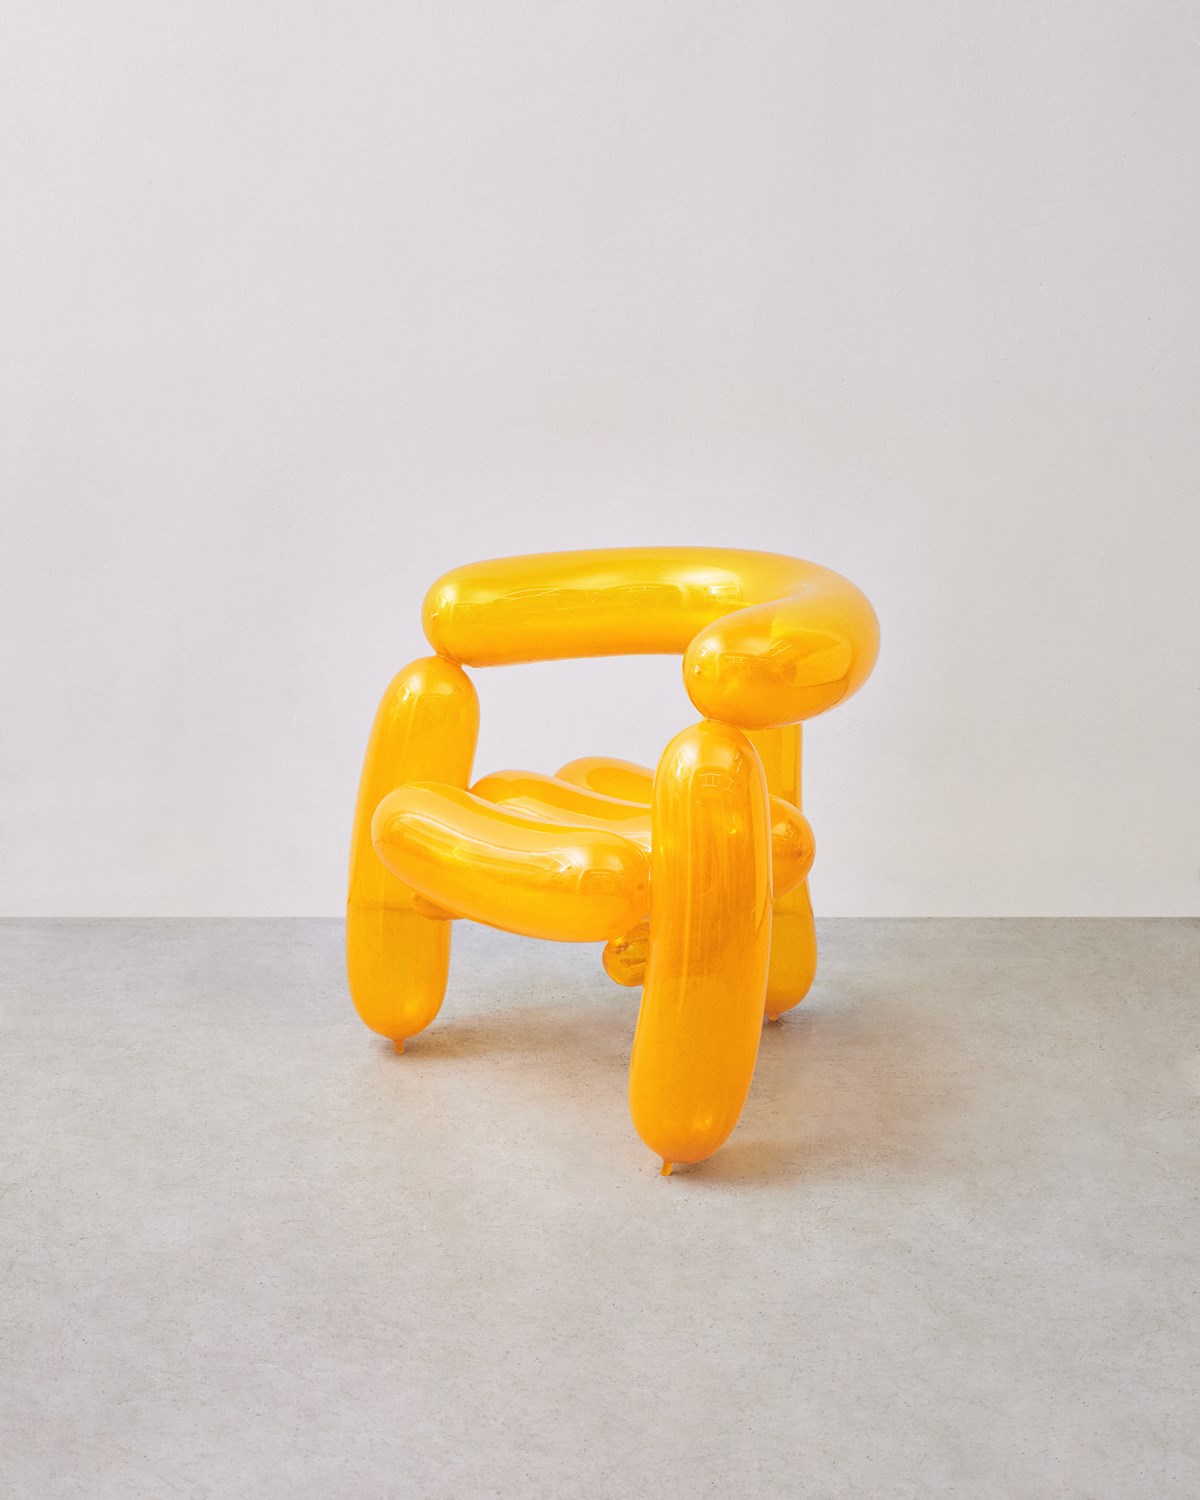 Blowing Series Furniture Collection by Seungjin Yang